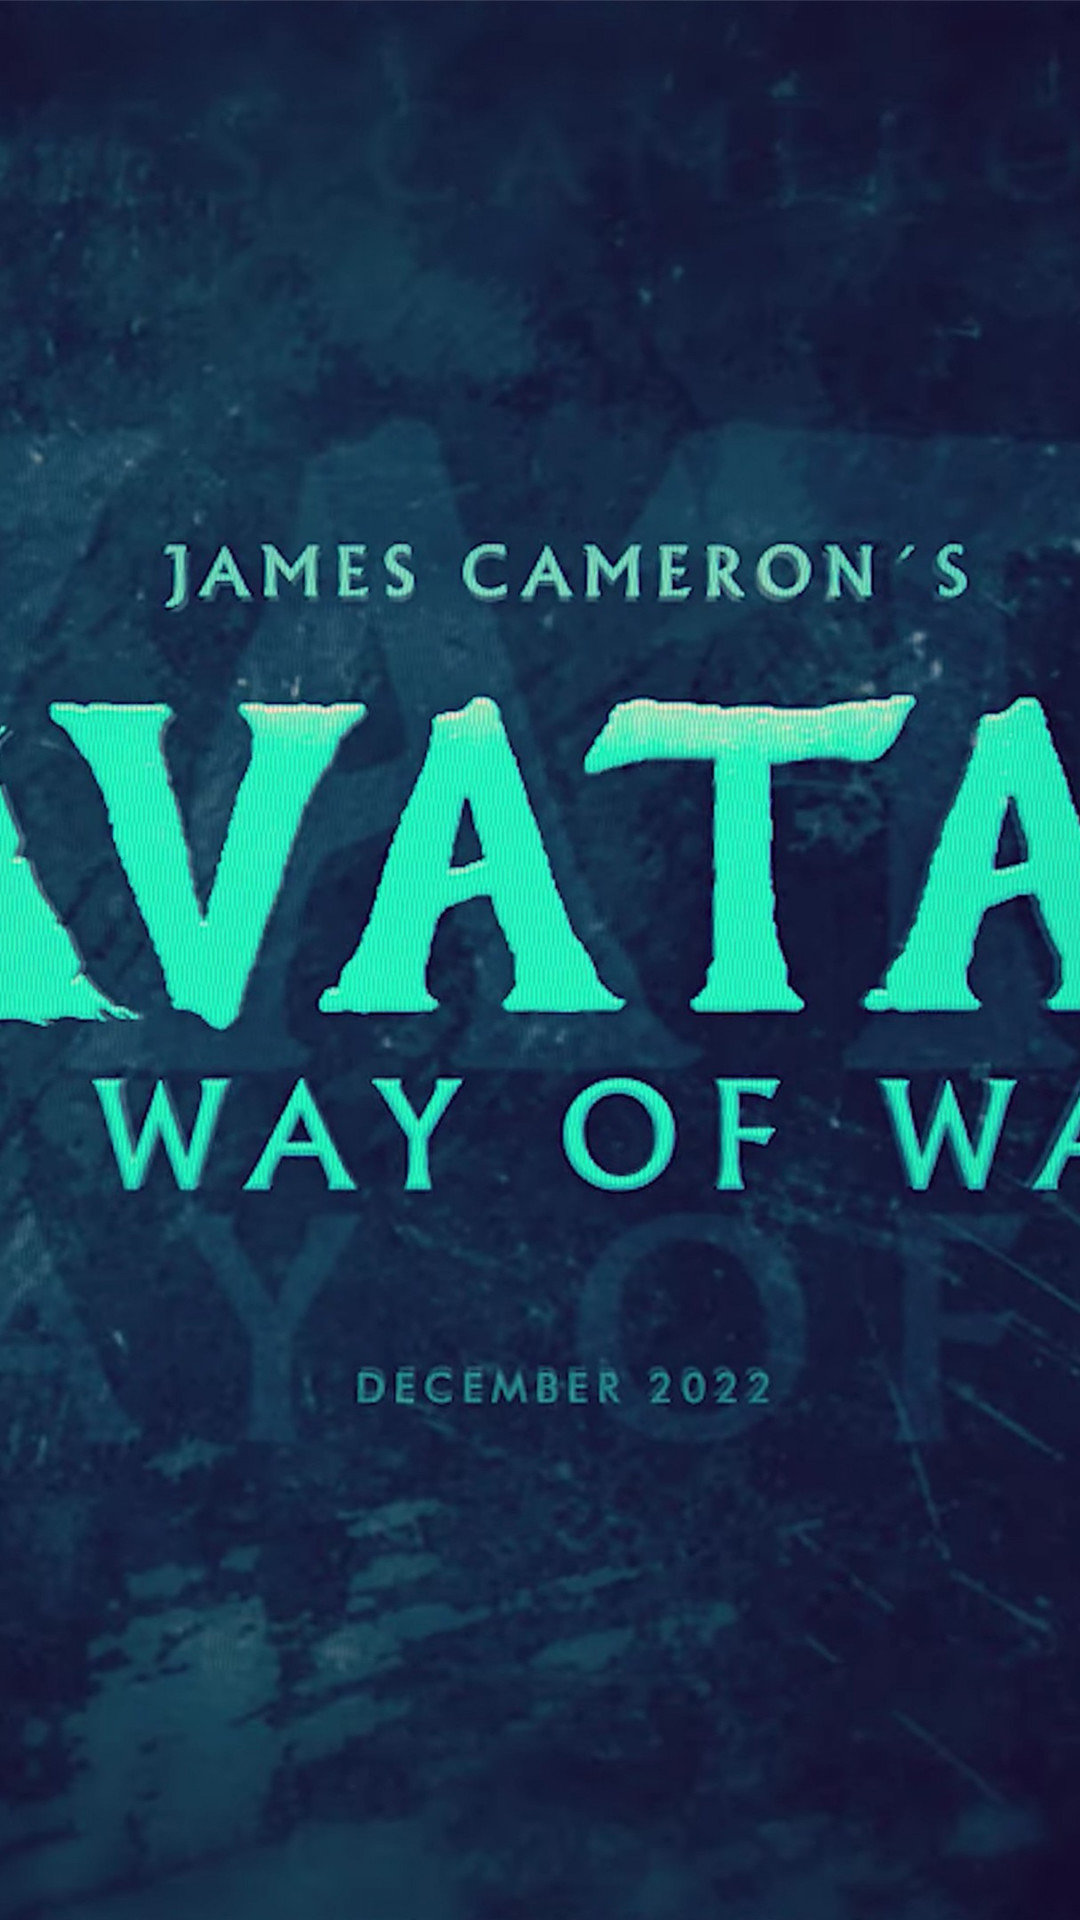 Avatar 2 The Way of Water wallpaper 1080x1920